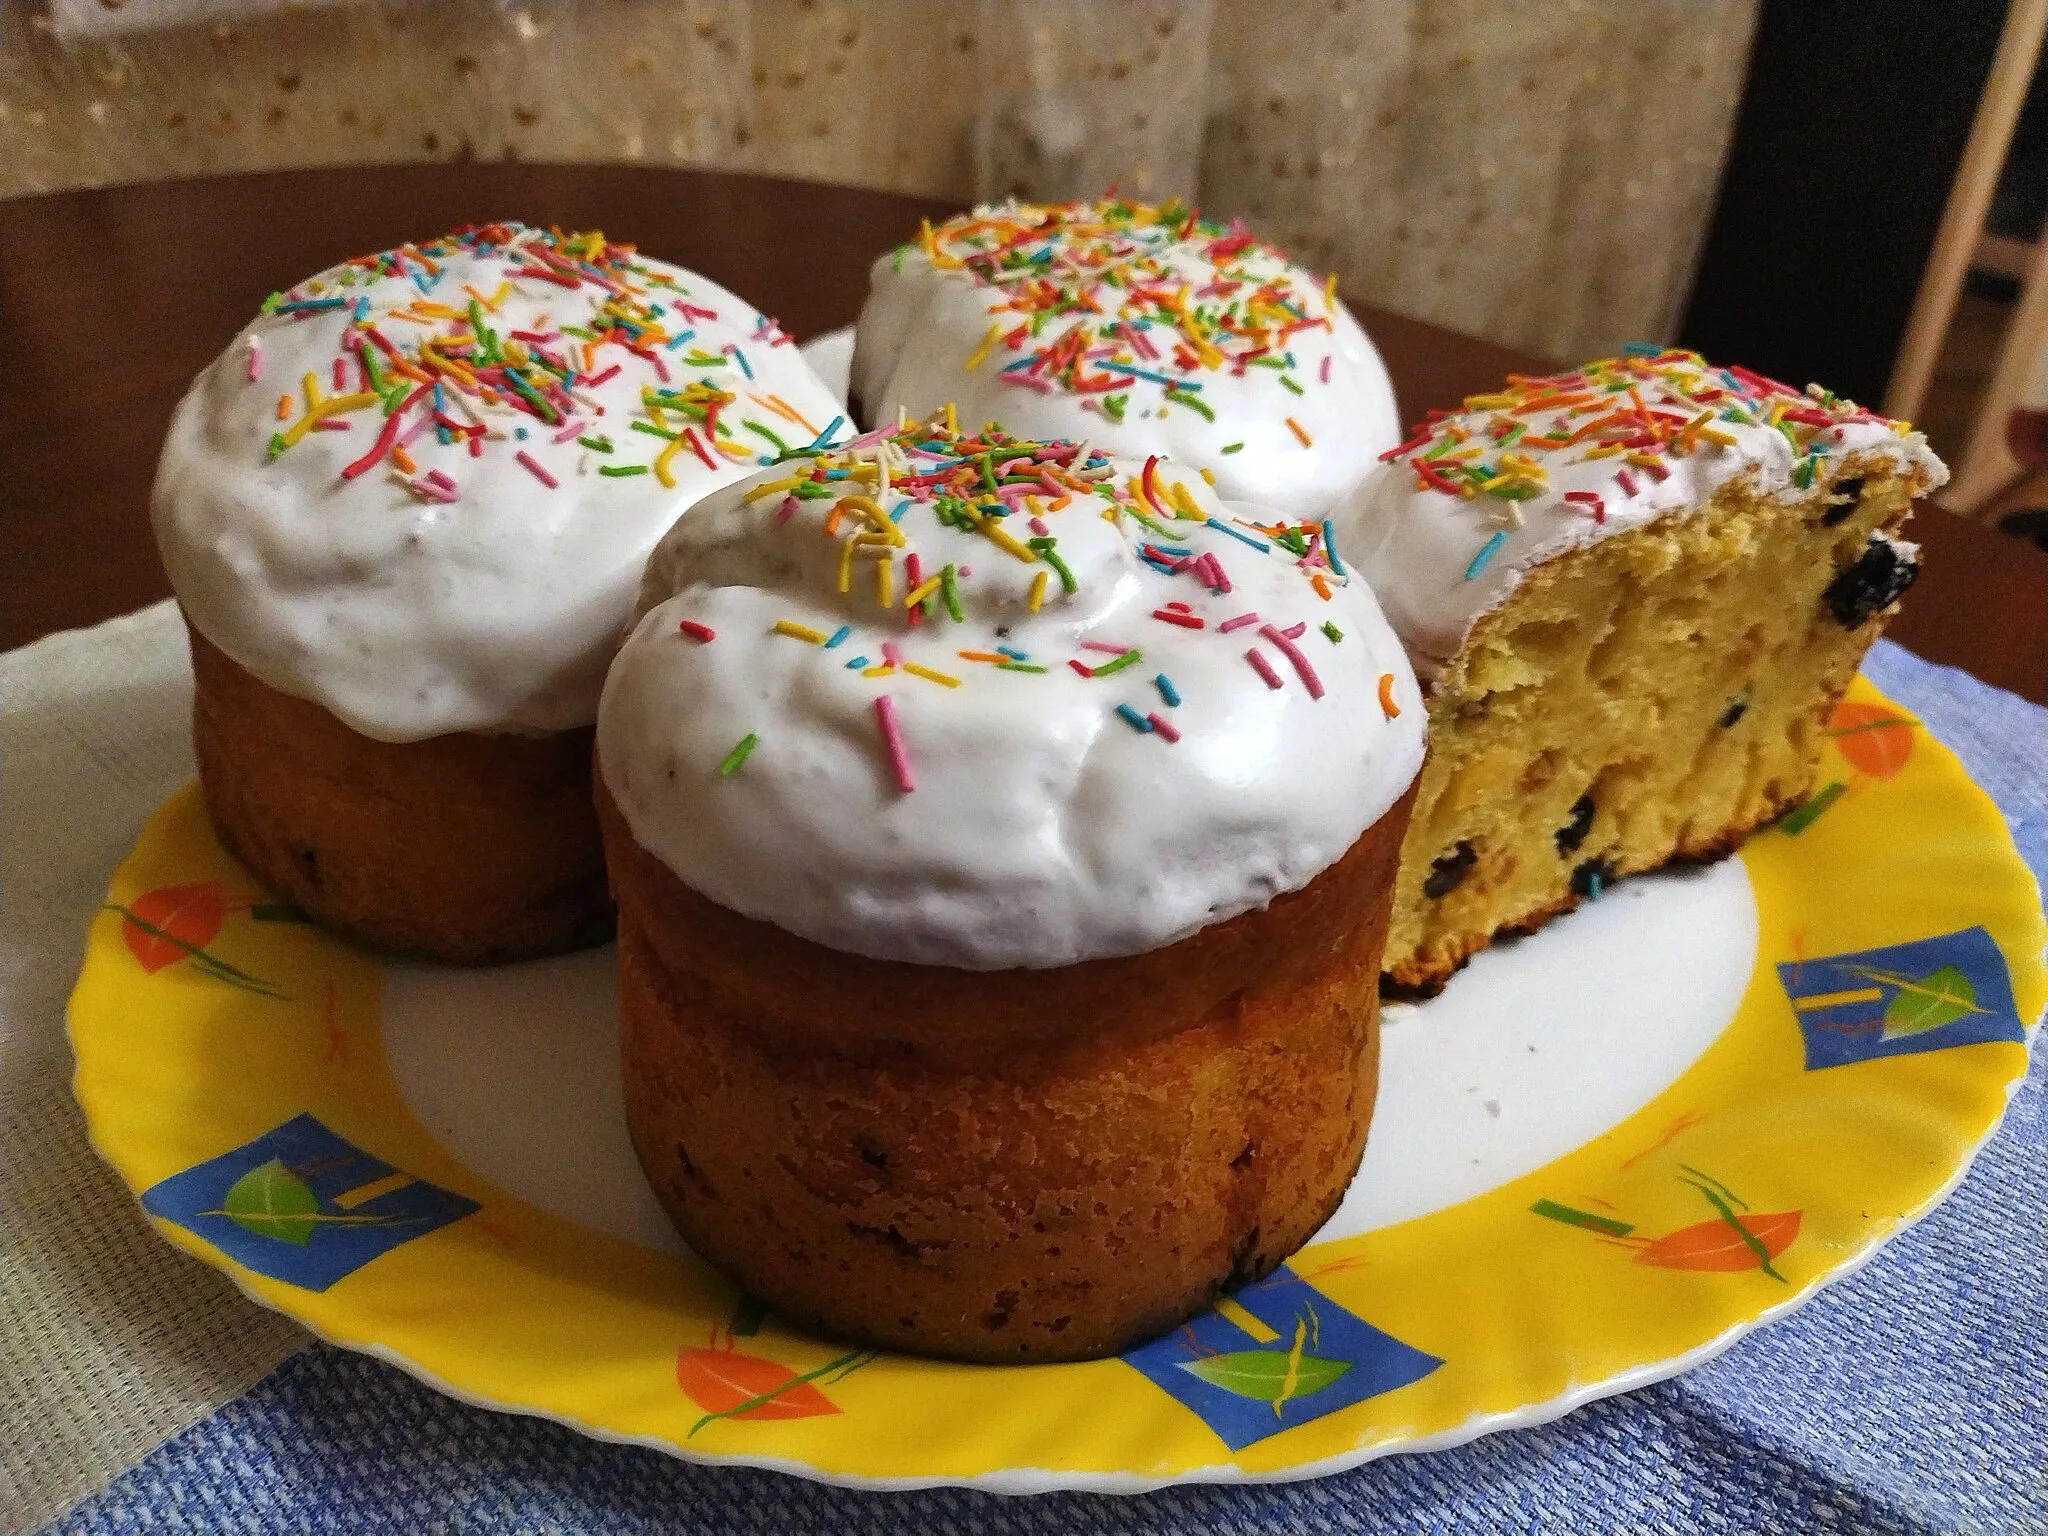 Photo showing: Kulich, a type of traditional Easter bread from Russia, made in a cylindrical shape, with frosting and coloured sugar on top. The dough usually contains raisins, dried apricots, candied fruits, and such. The photo represents kulichi (plural form of 'kulich') baked according to a monastery recipe, which also requires cognac, cardamom, and tvorog (Eastern European cottage cheese).